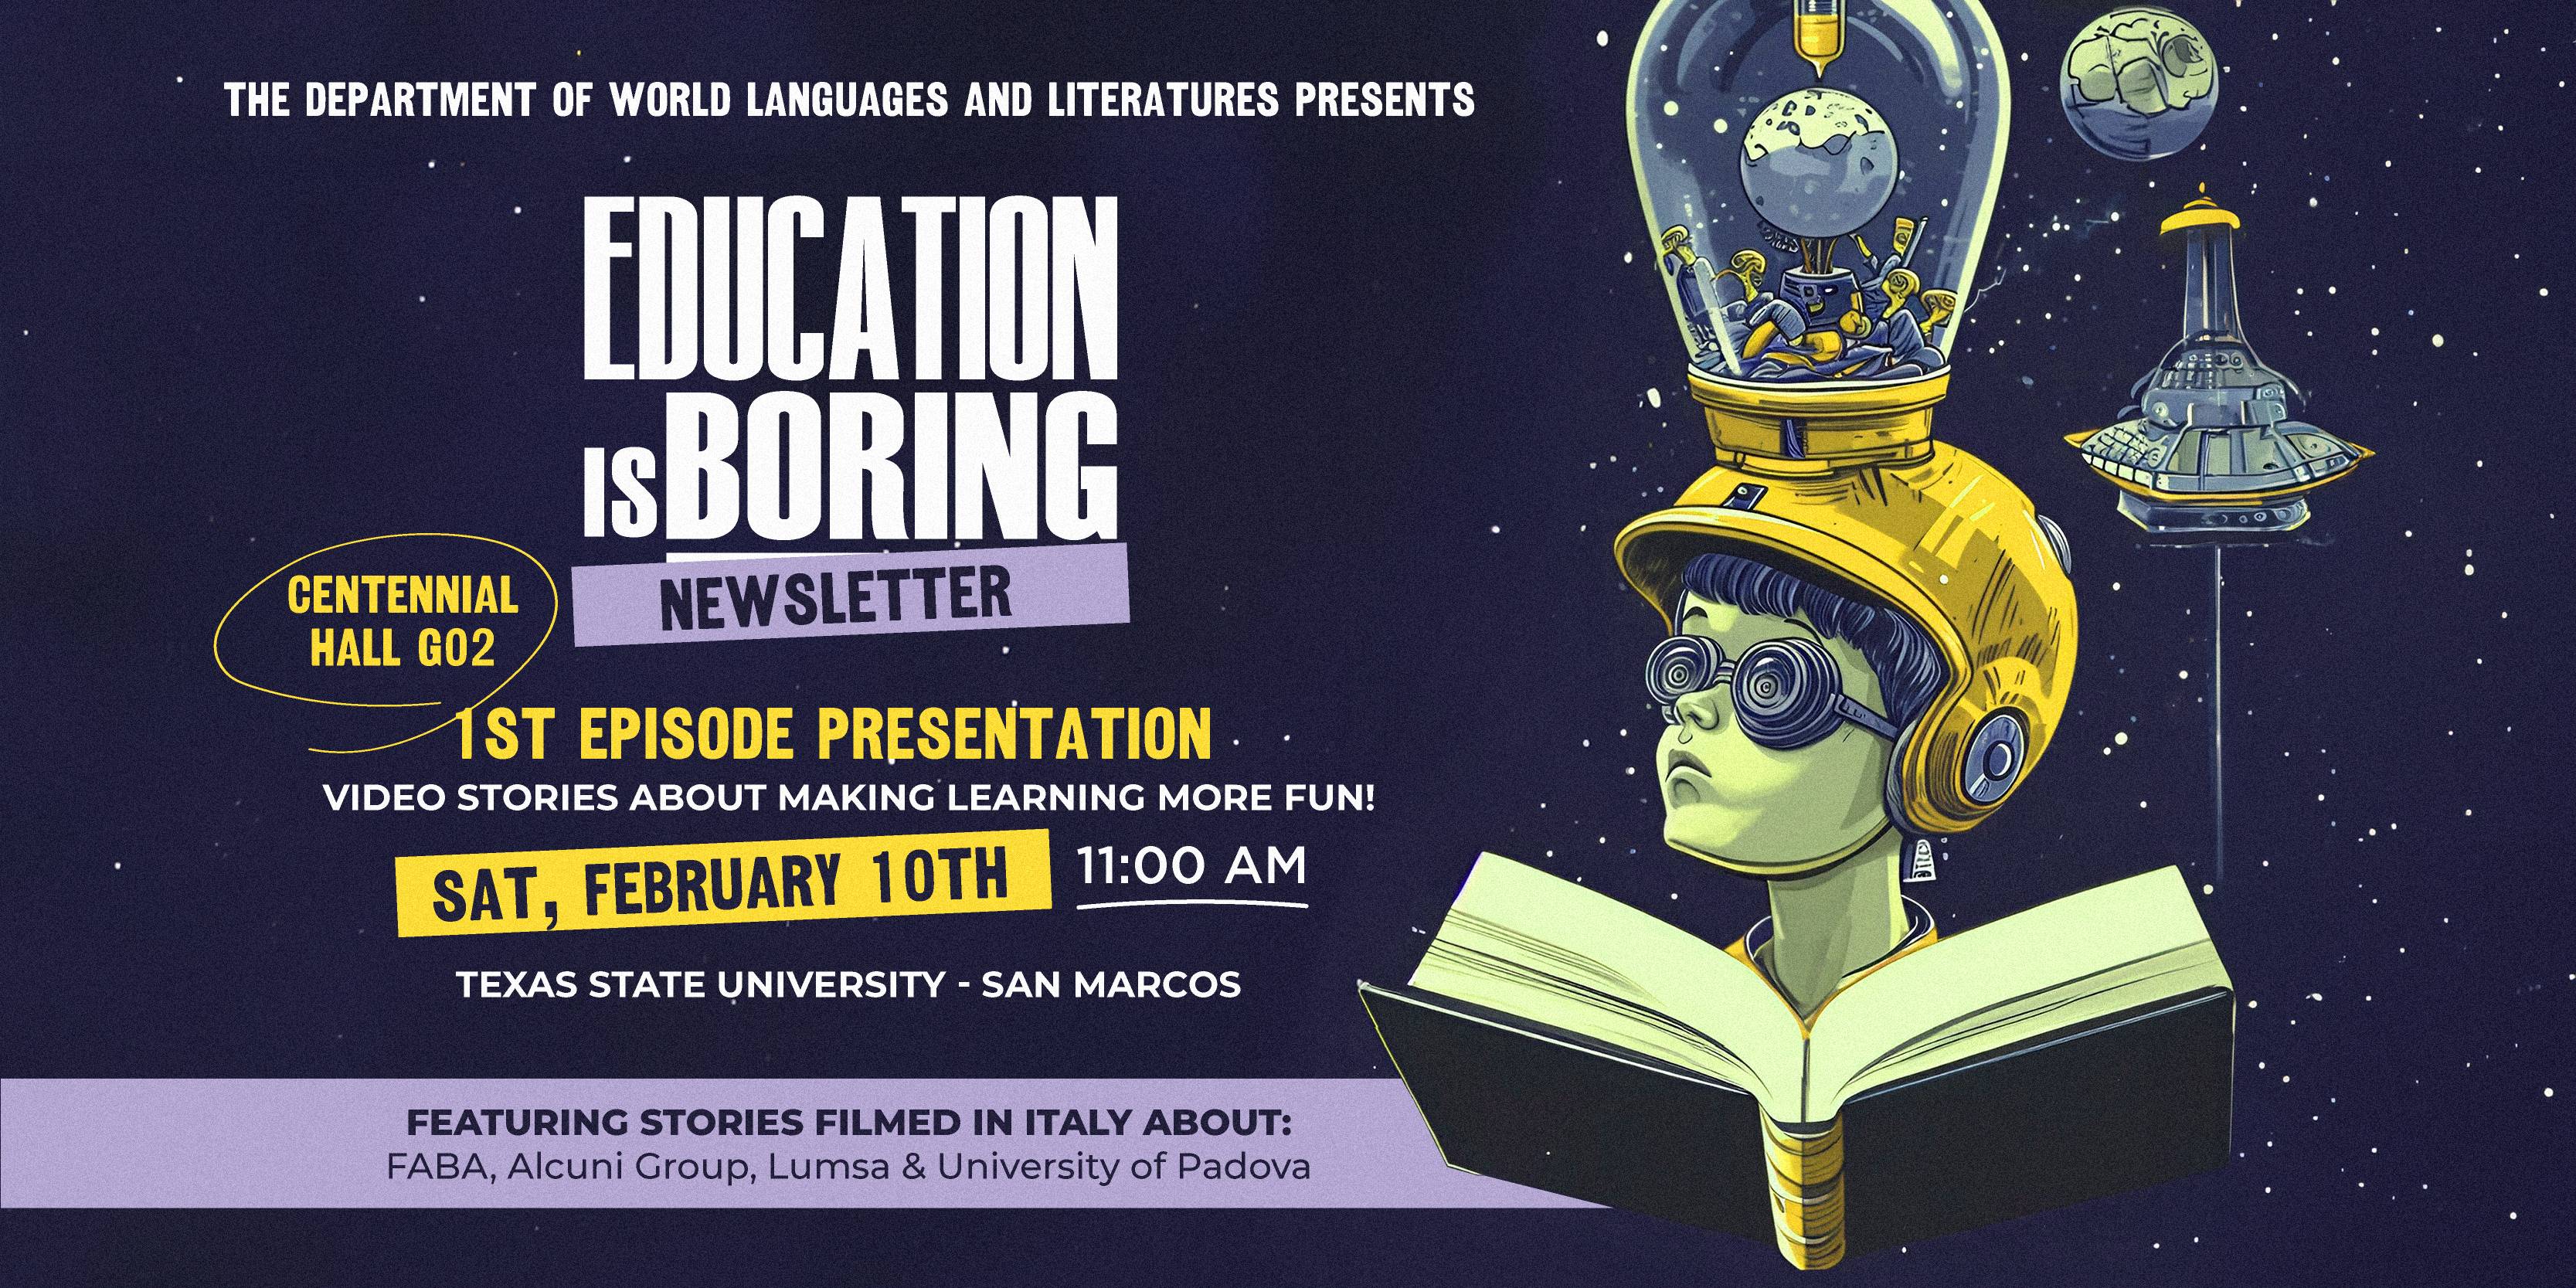 The Department of World Languages and Literatures presents: Education is Boring 1st Episode Presentation of Video Stories About Making Learning More Fun! Come Saturday, February 10th at 11am - 12:30pm in CENTENNIAL HALL G02, Texas State University.    Featuring Stories Filmed in Italy about FABA, Alcuni Group, Lumsa and the University of Padova while connecting from Italy. To RSVP for this event follow this link: https://www.italchannel.tv/    For more information, please contact Dr. Di Mauro-Jackson (md11@txstate.edu) or Sergio Carvajal (sec71@txstate.edu).